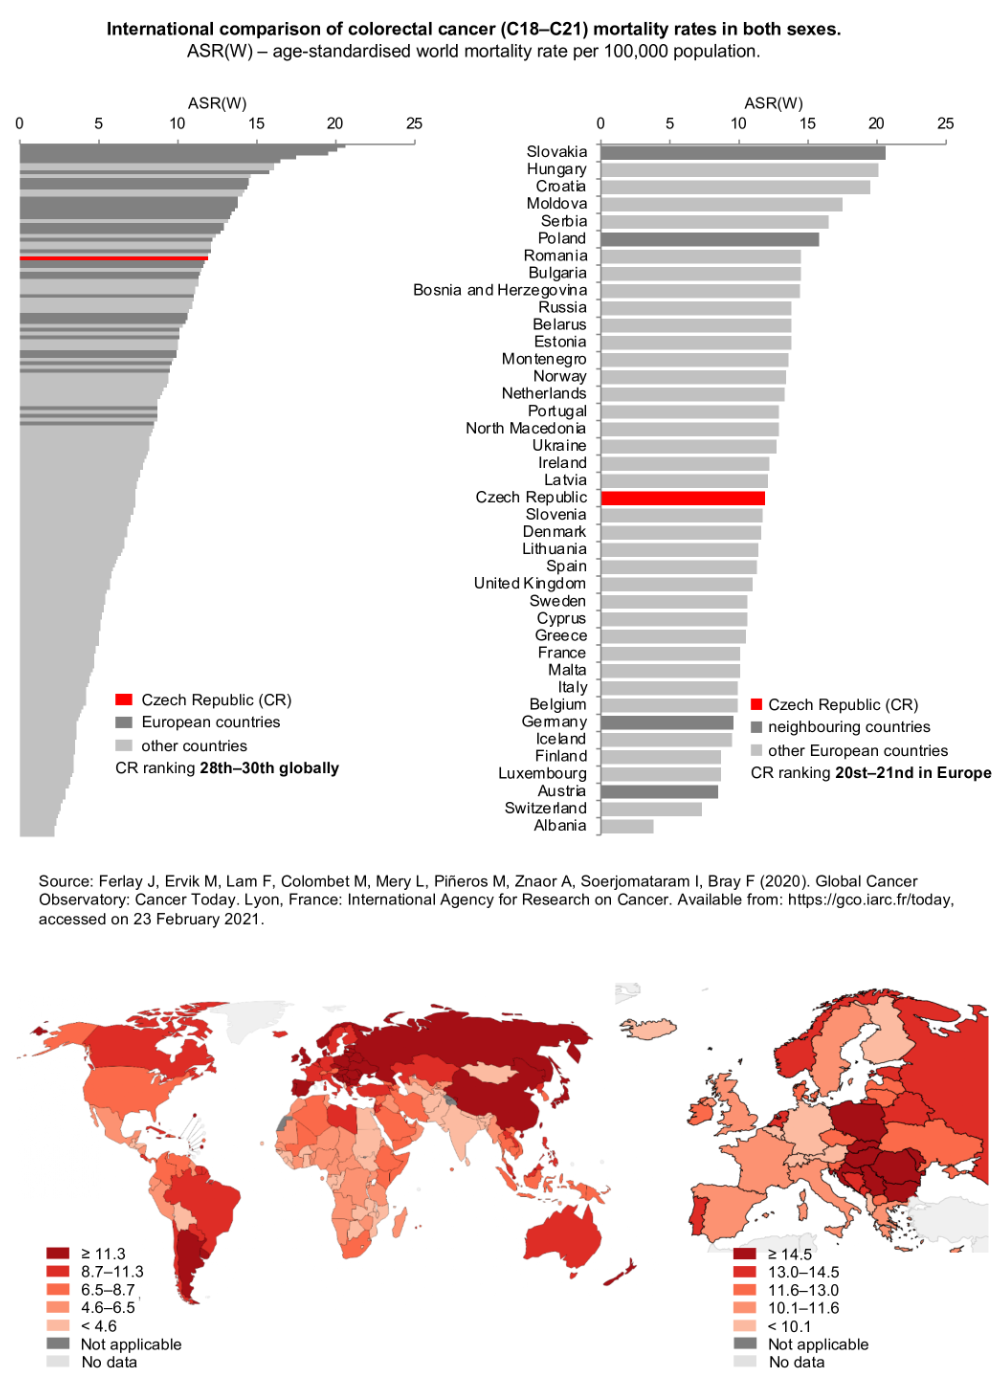 Figure 2a: International comparison of colorectal cancer mortality rates – both sexes. ASR(W) – age-standardized world mortality rate per 100,000 population. Source: GLOBOCAN 2020